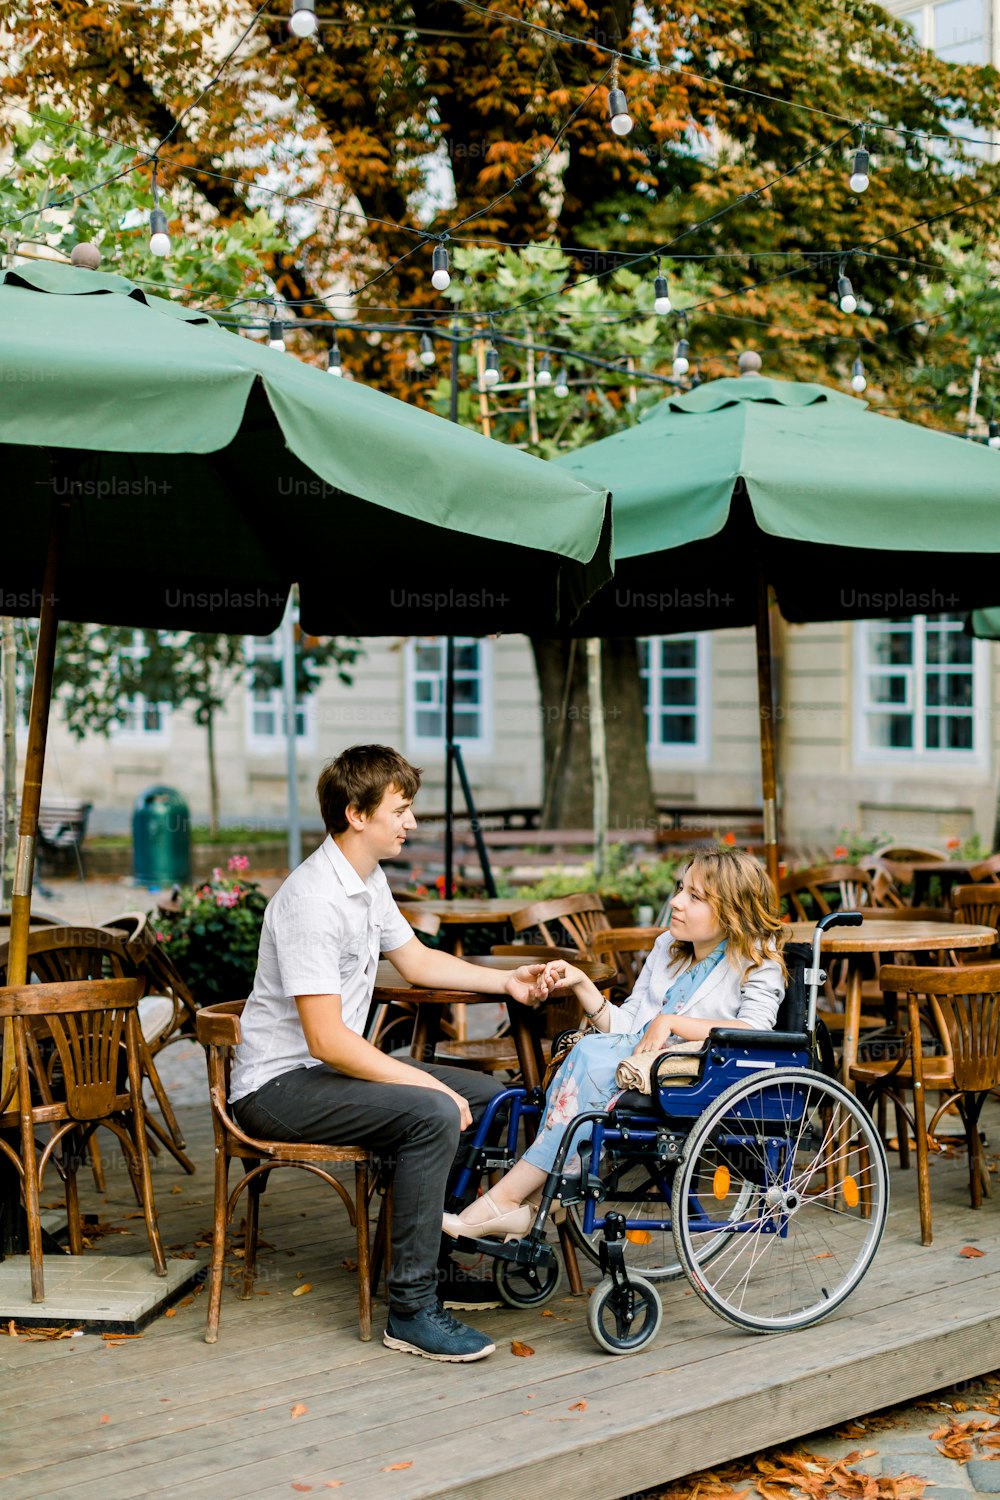 Young pretty woman in wheelchair spending time together with male boyfriend, holding hands, at outdoor cafe in the old city center.